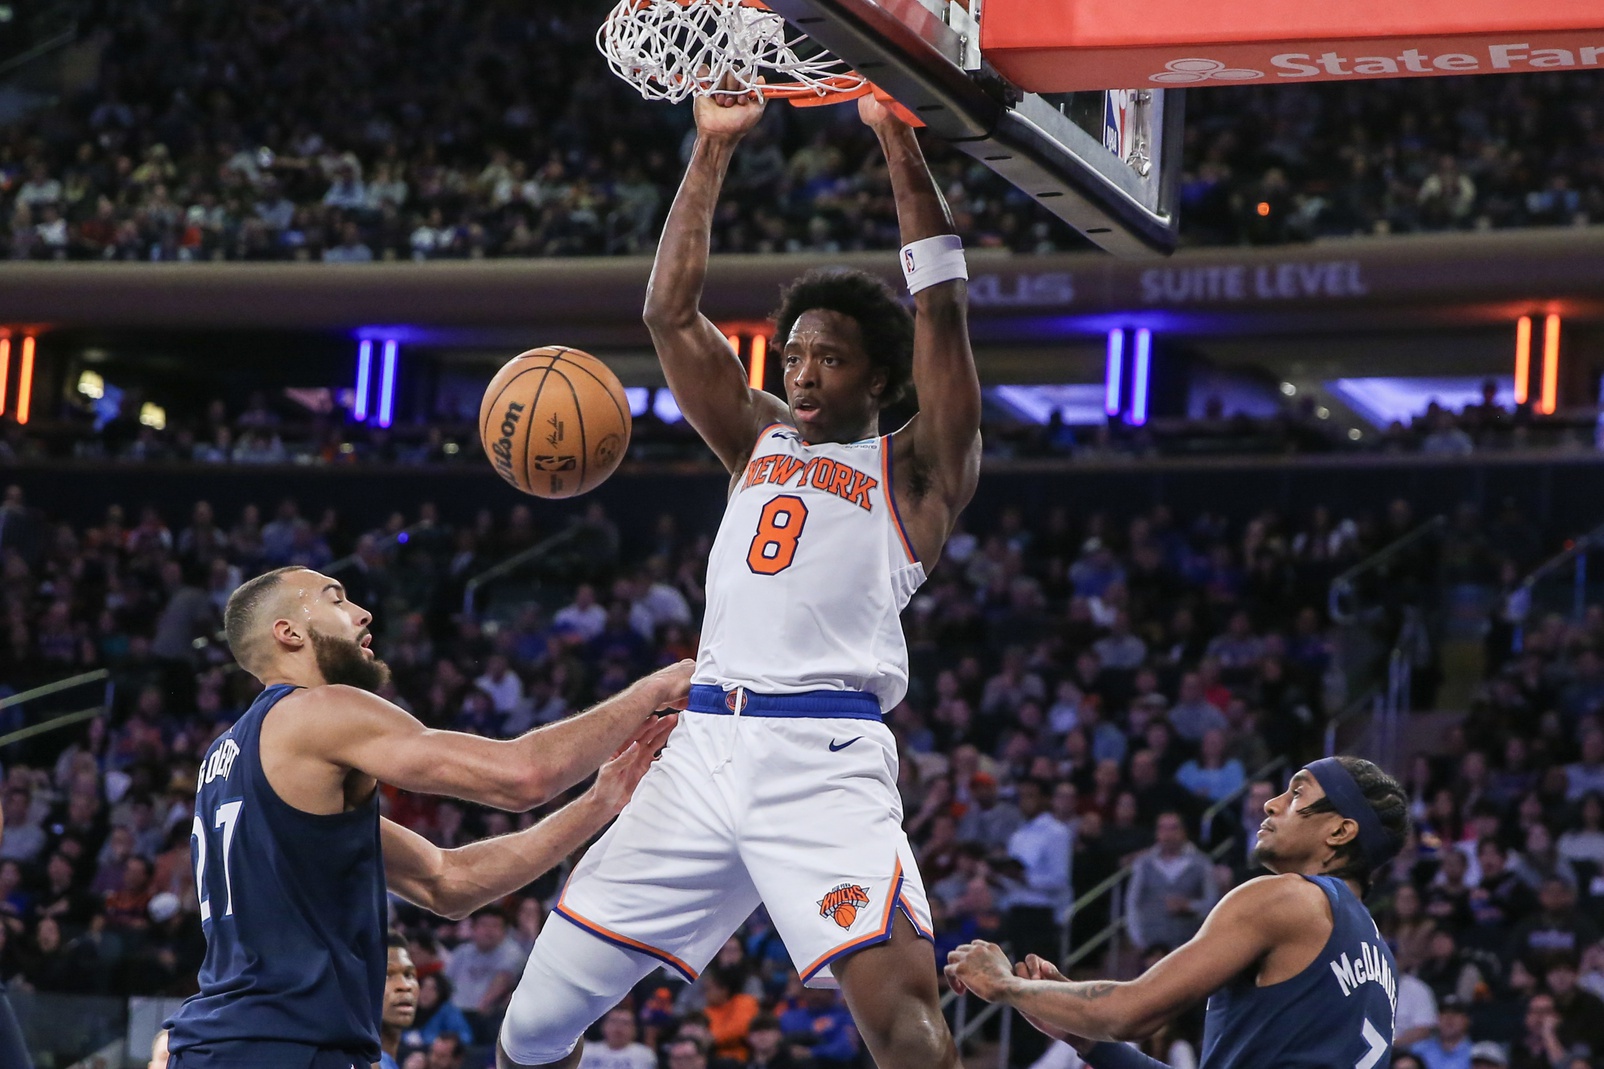 Takeaways from the Knicks' win over the Kings on Saturday